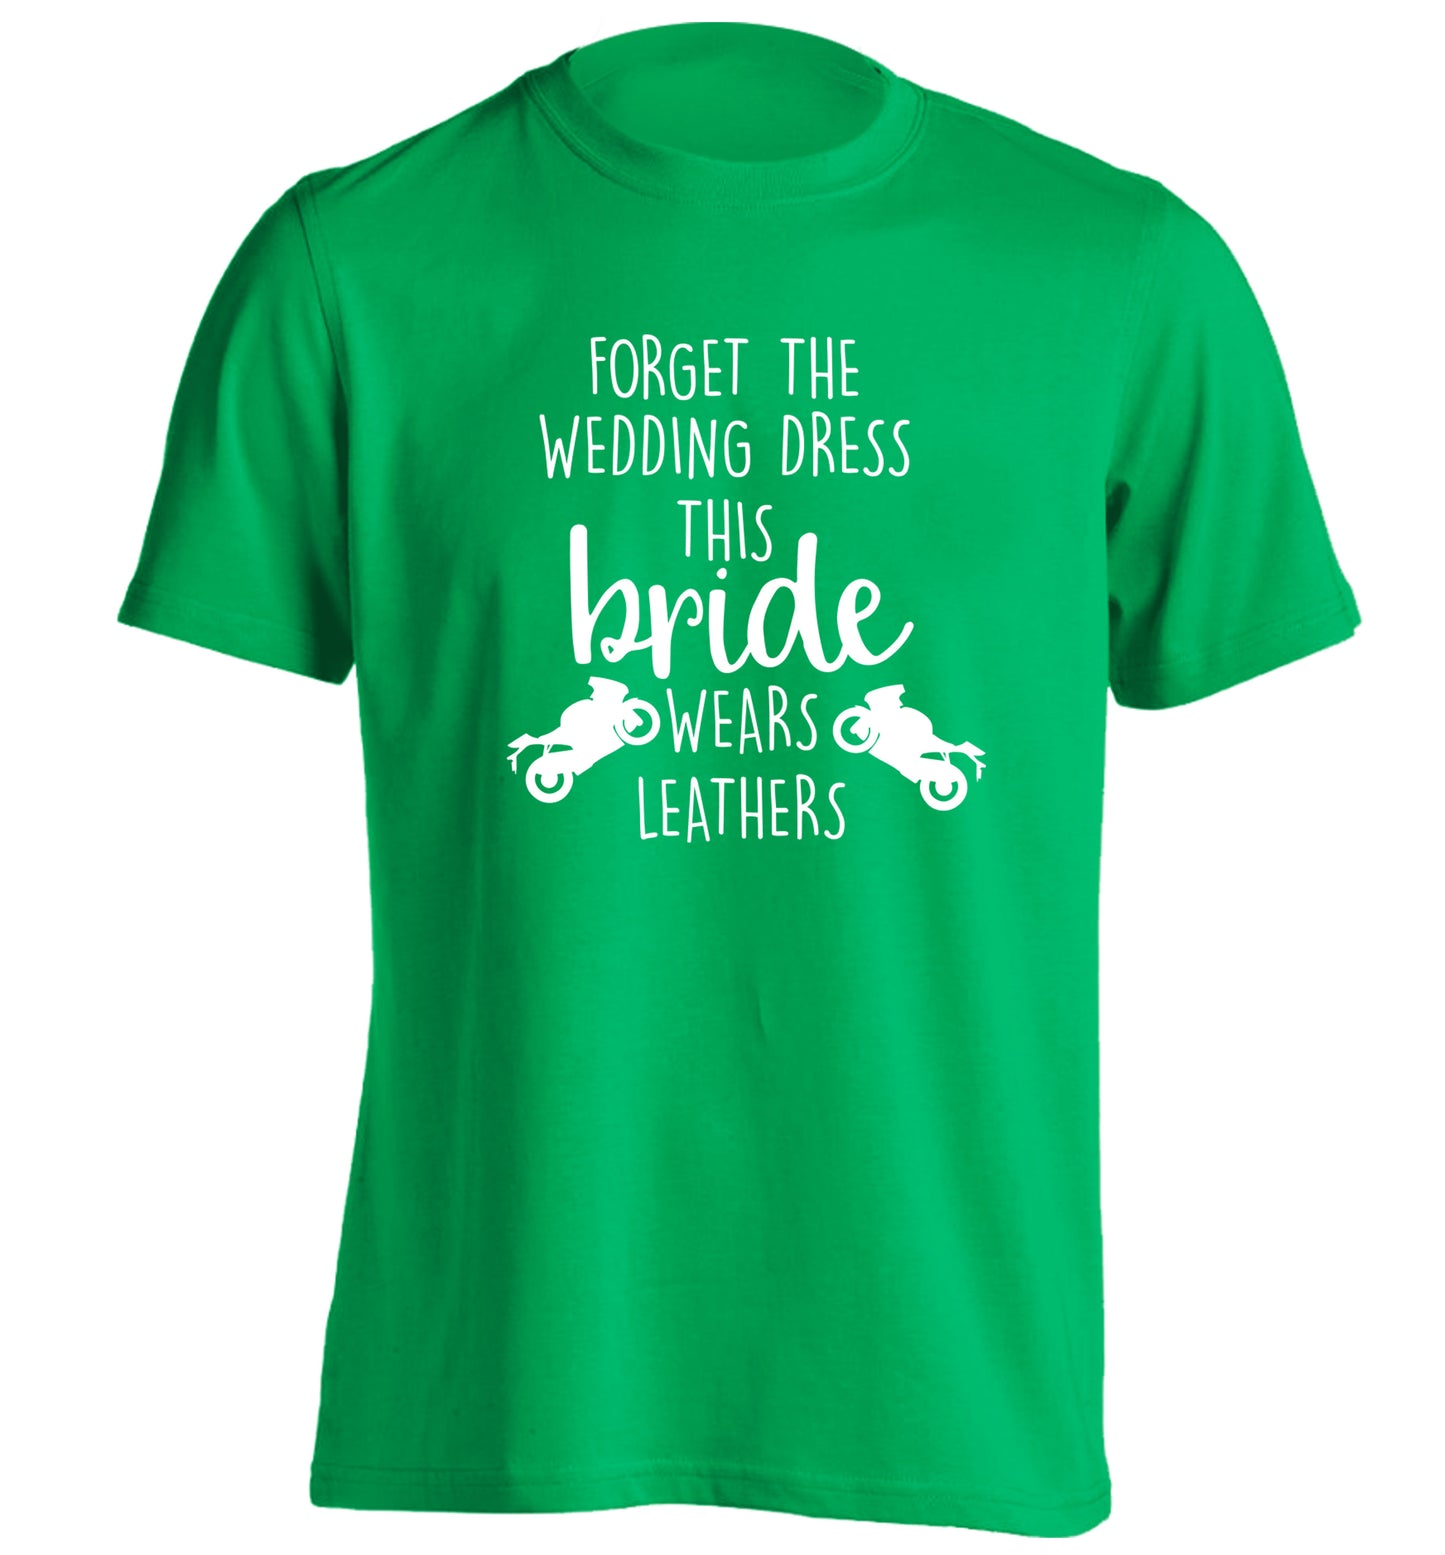 Forget the wedding dress this bride wears leathers adults unisex green Tshirt 2XL